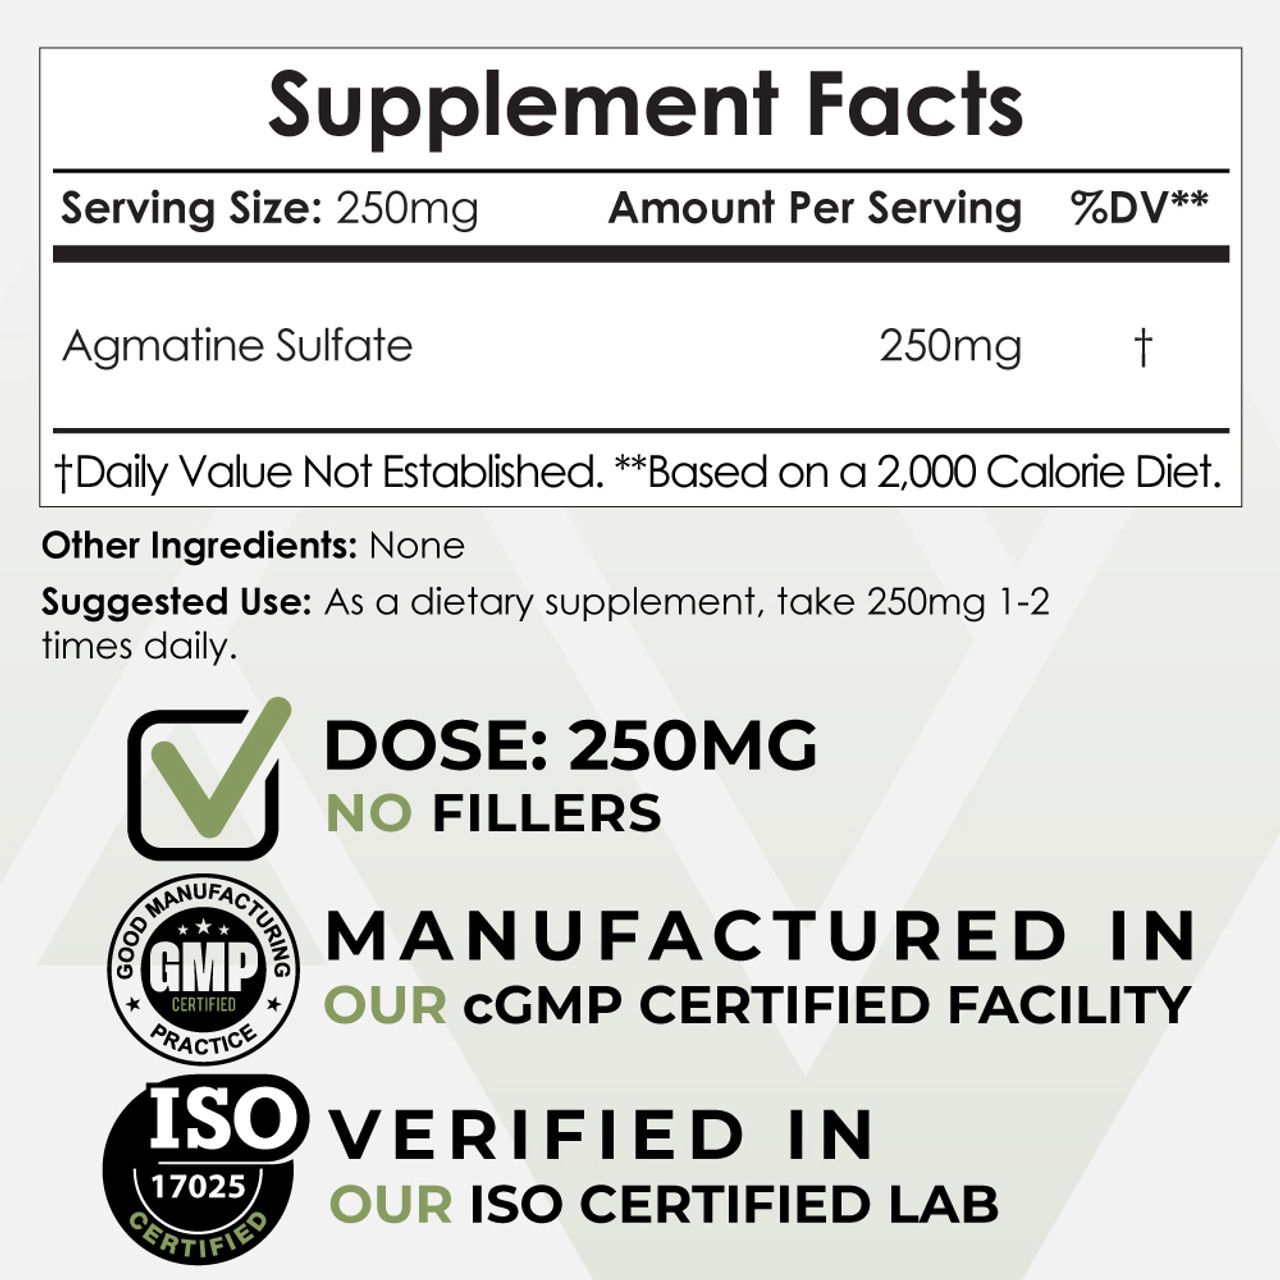 Agmatine sulfate ingredient label.